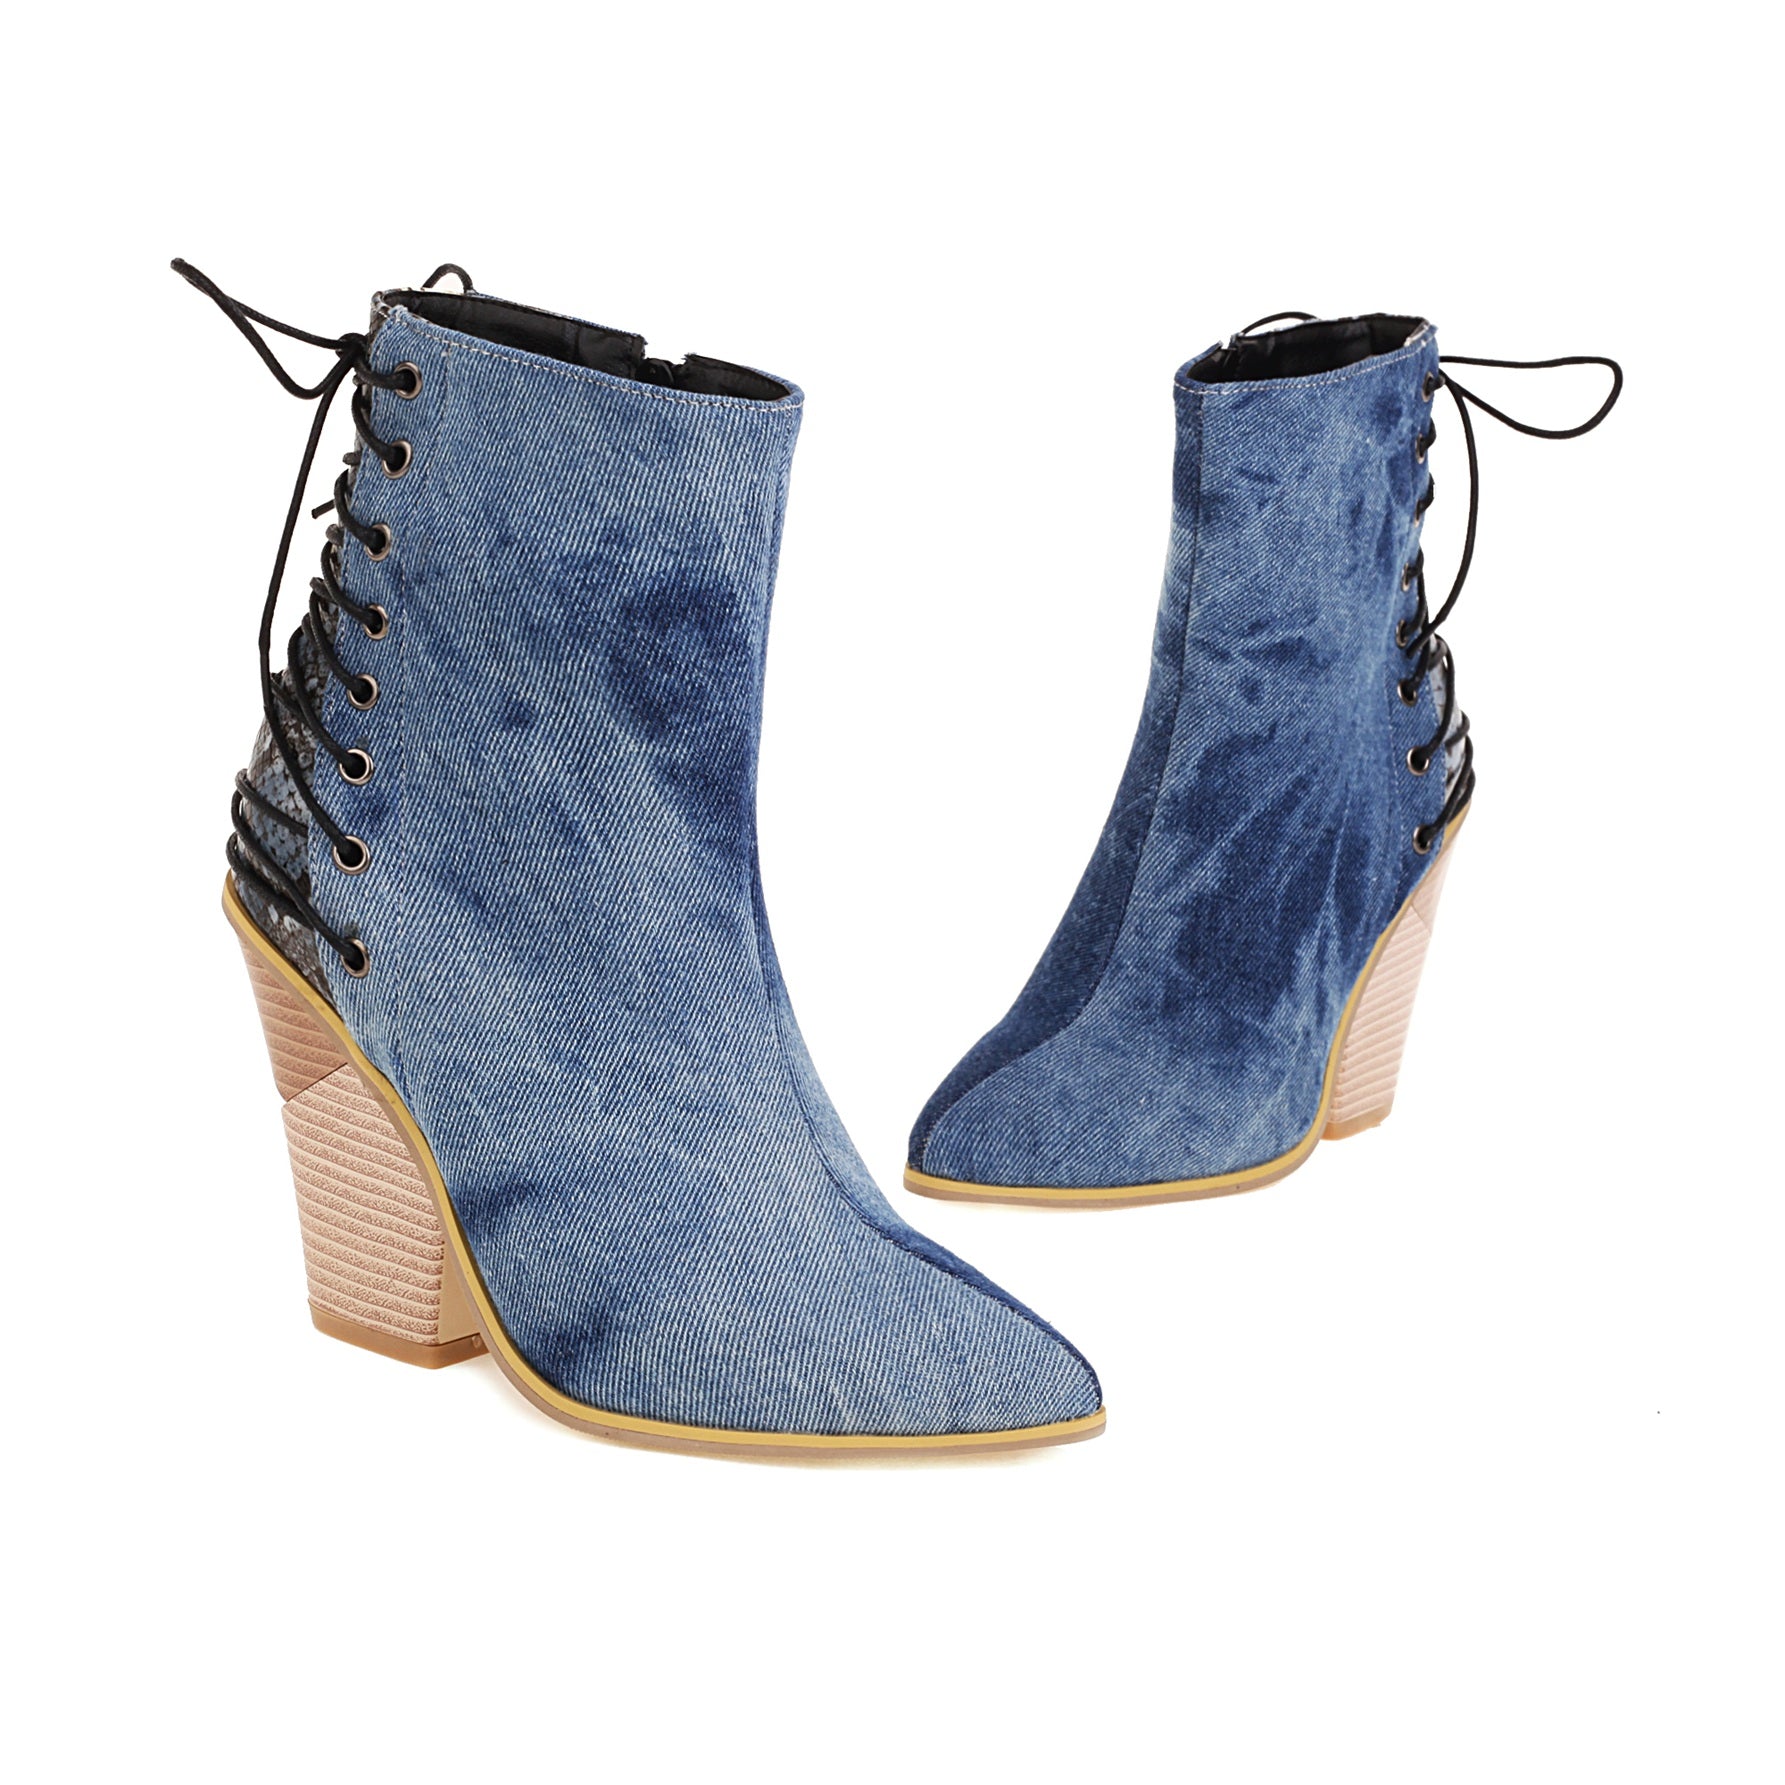 Bigsizeheels Stitched lace-up pointed ankle boots - Blue freeshipping - bigsizeheel®-size5-size15 -All Plus Sizes Available!